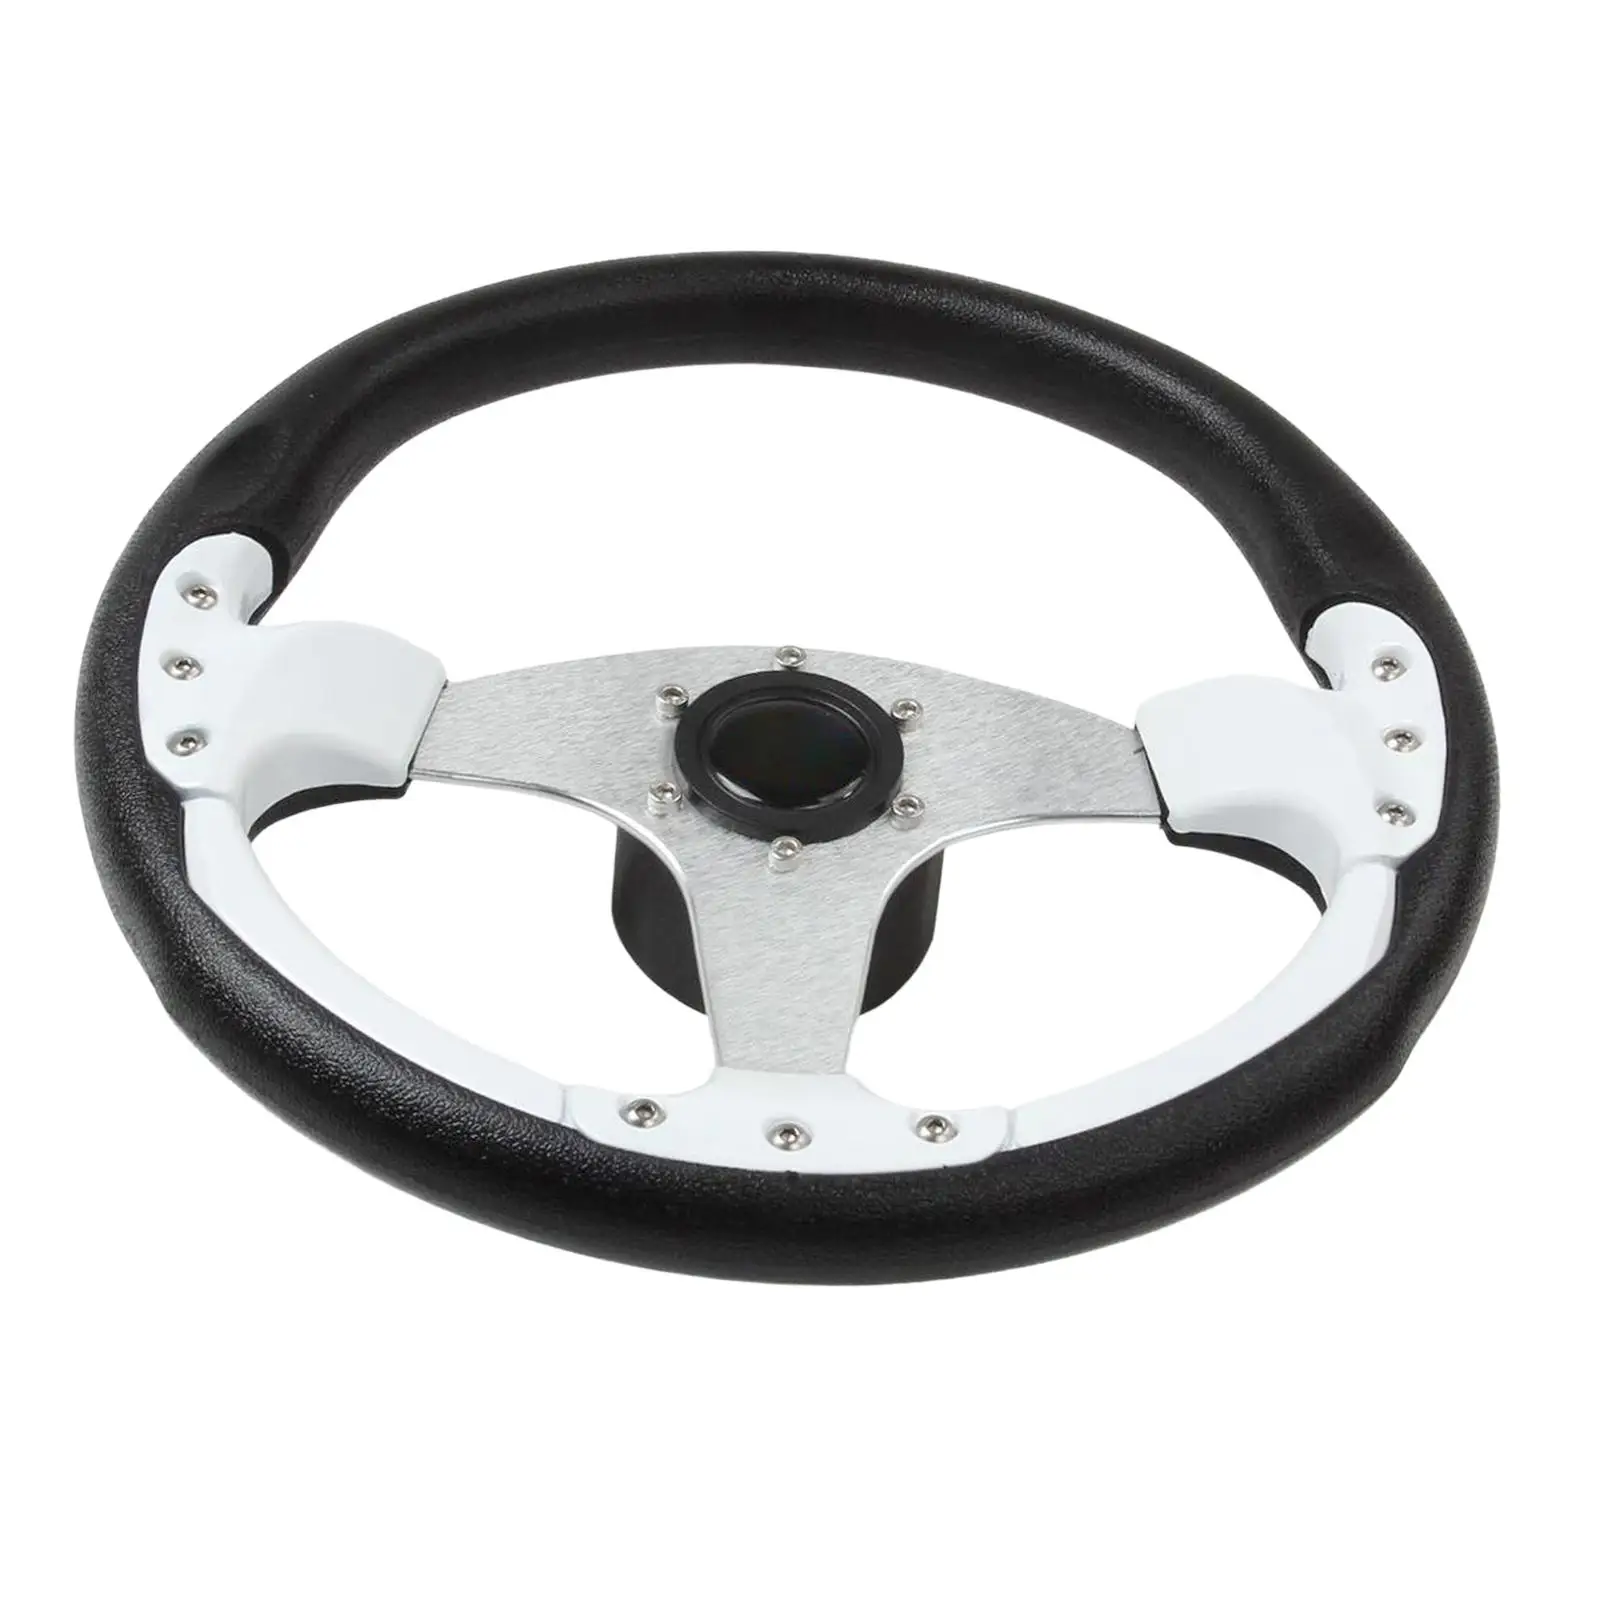 3 Spokes 13.8 inch Boat Steering Wheel 3/4 Tapered Shaft for Yachts